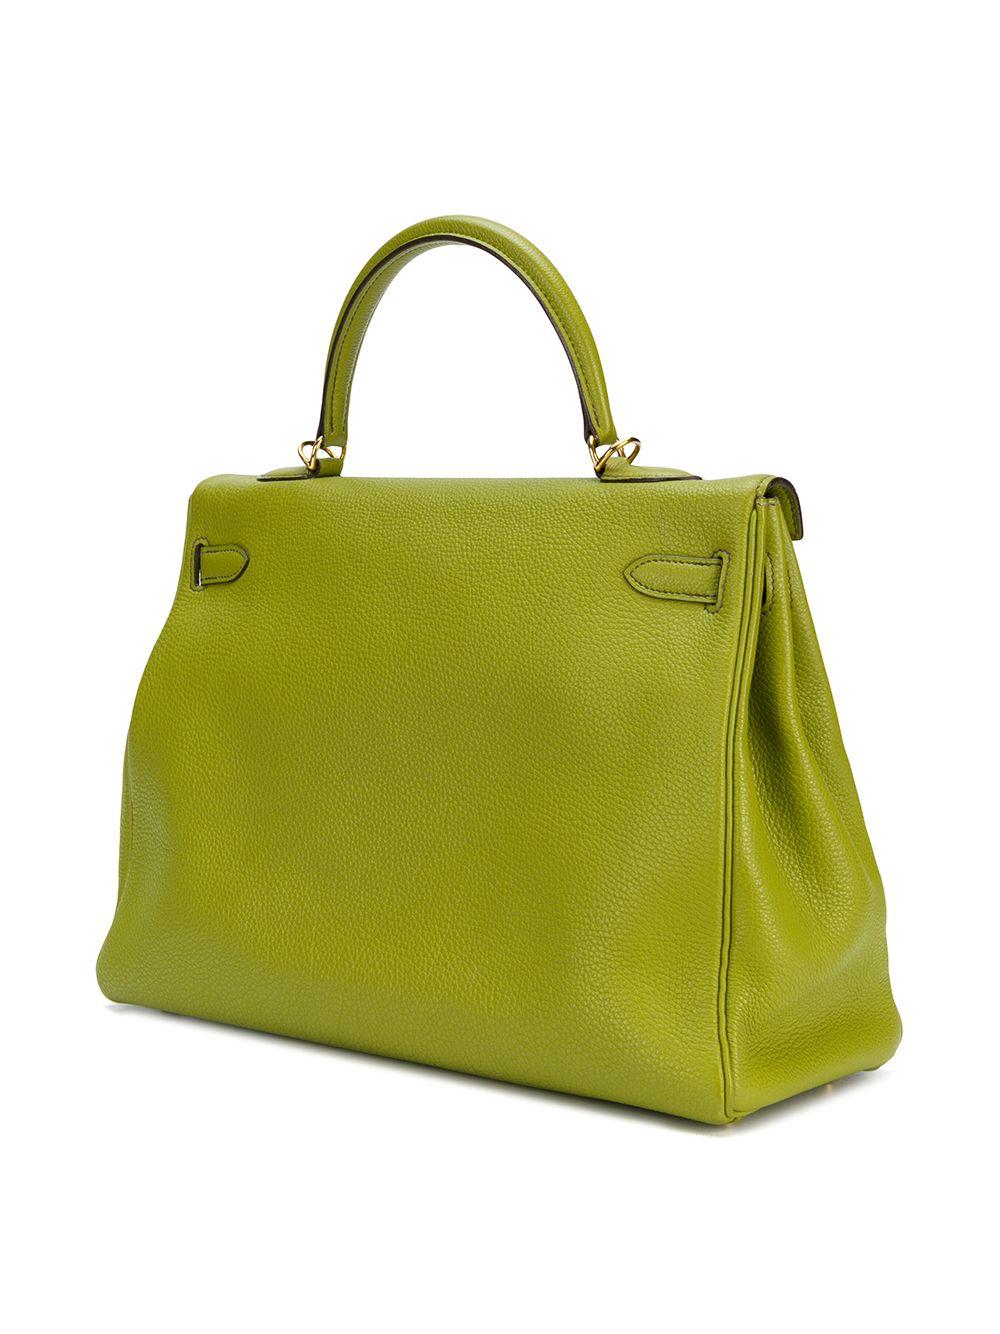 Treat yourself to this exotic Vert Anis Hermès Kelly bag, a true testament to the quality of the house's craftsmanship, exuding timeless style and elegance, perfect for any occasion. Rendered in a smooth and lightweight Togo leather, popular for its